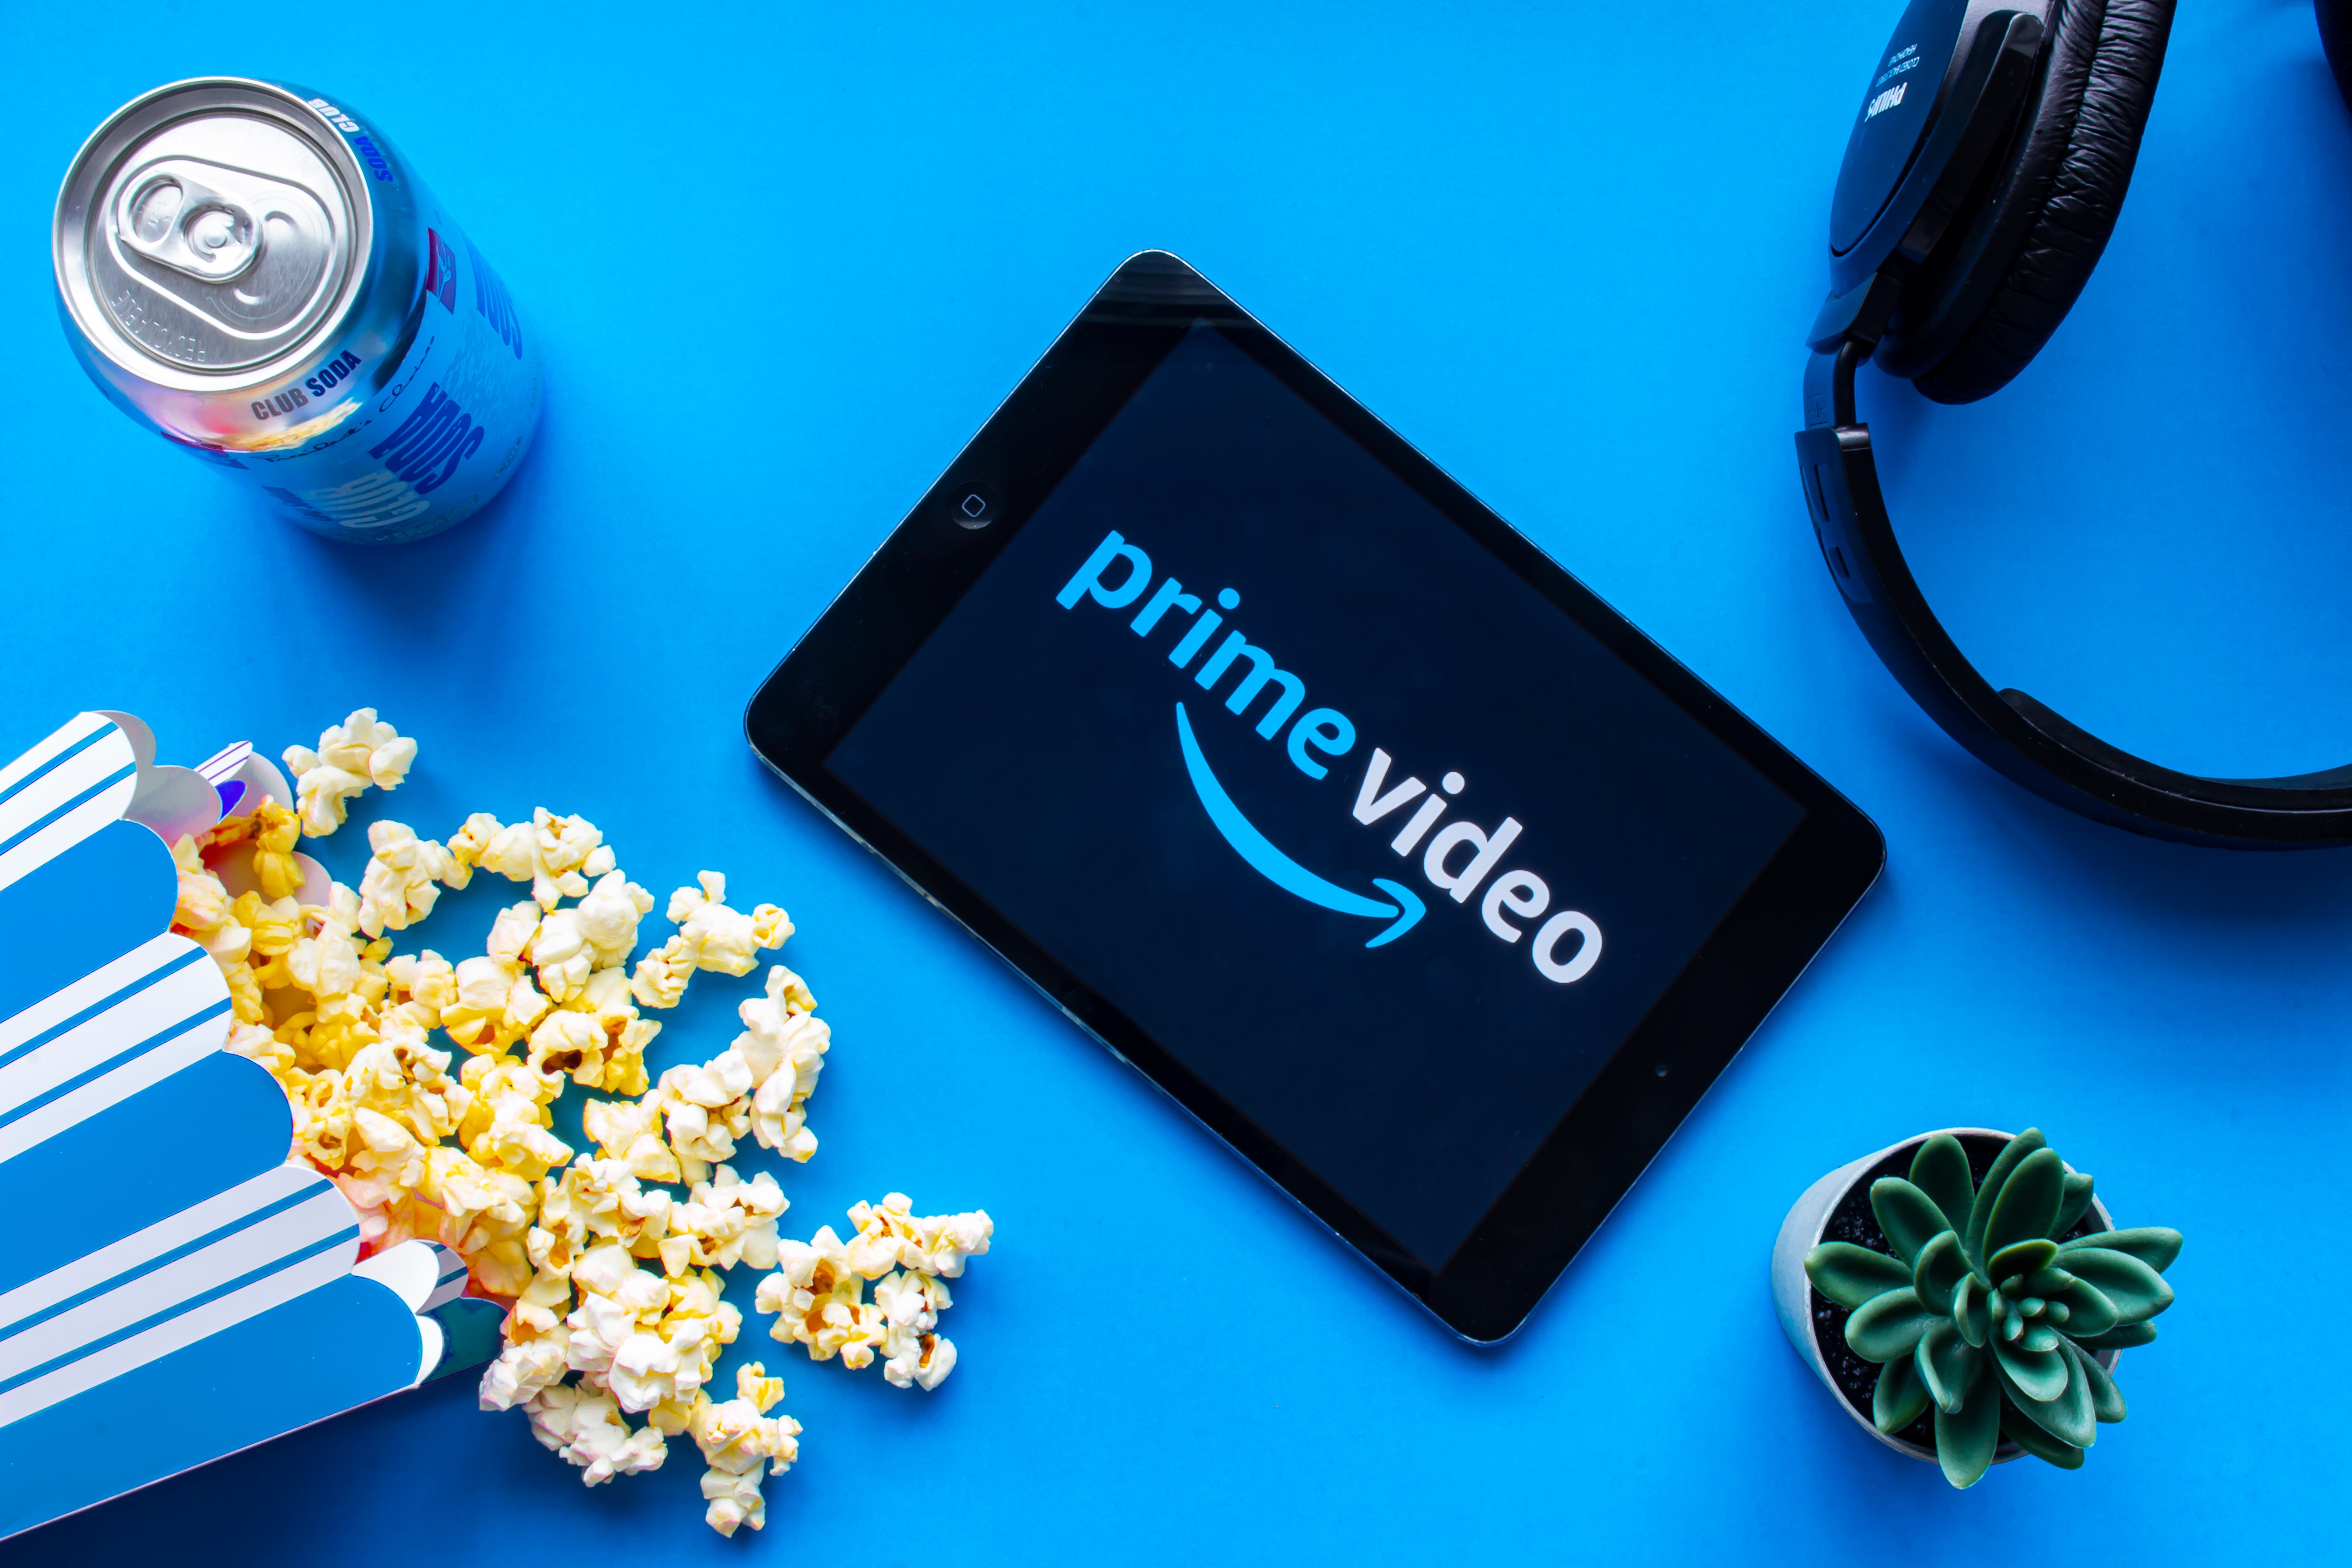 Amazon Prime Video Will Soon Charge $2.99 More For Ad-Free Videos So Is Prime Still Worth It? Here is Everything That Comes With Prime